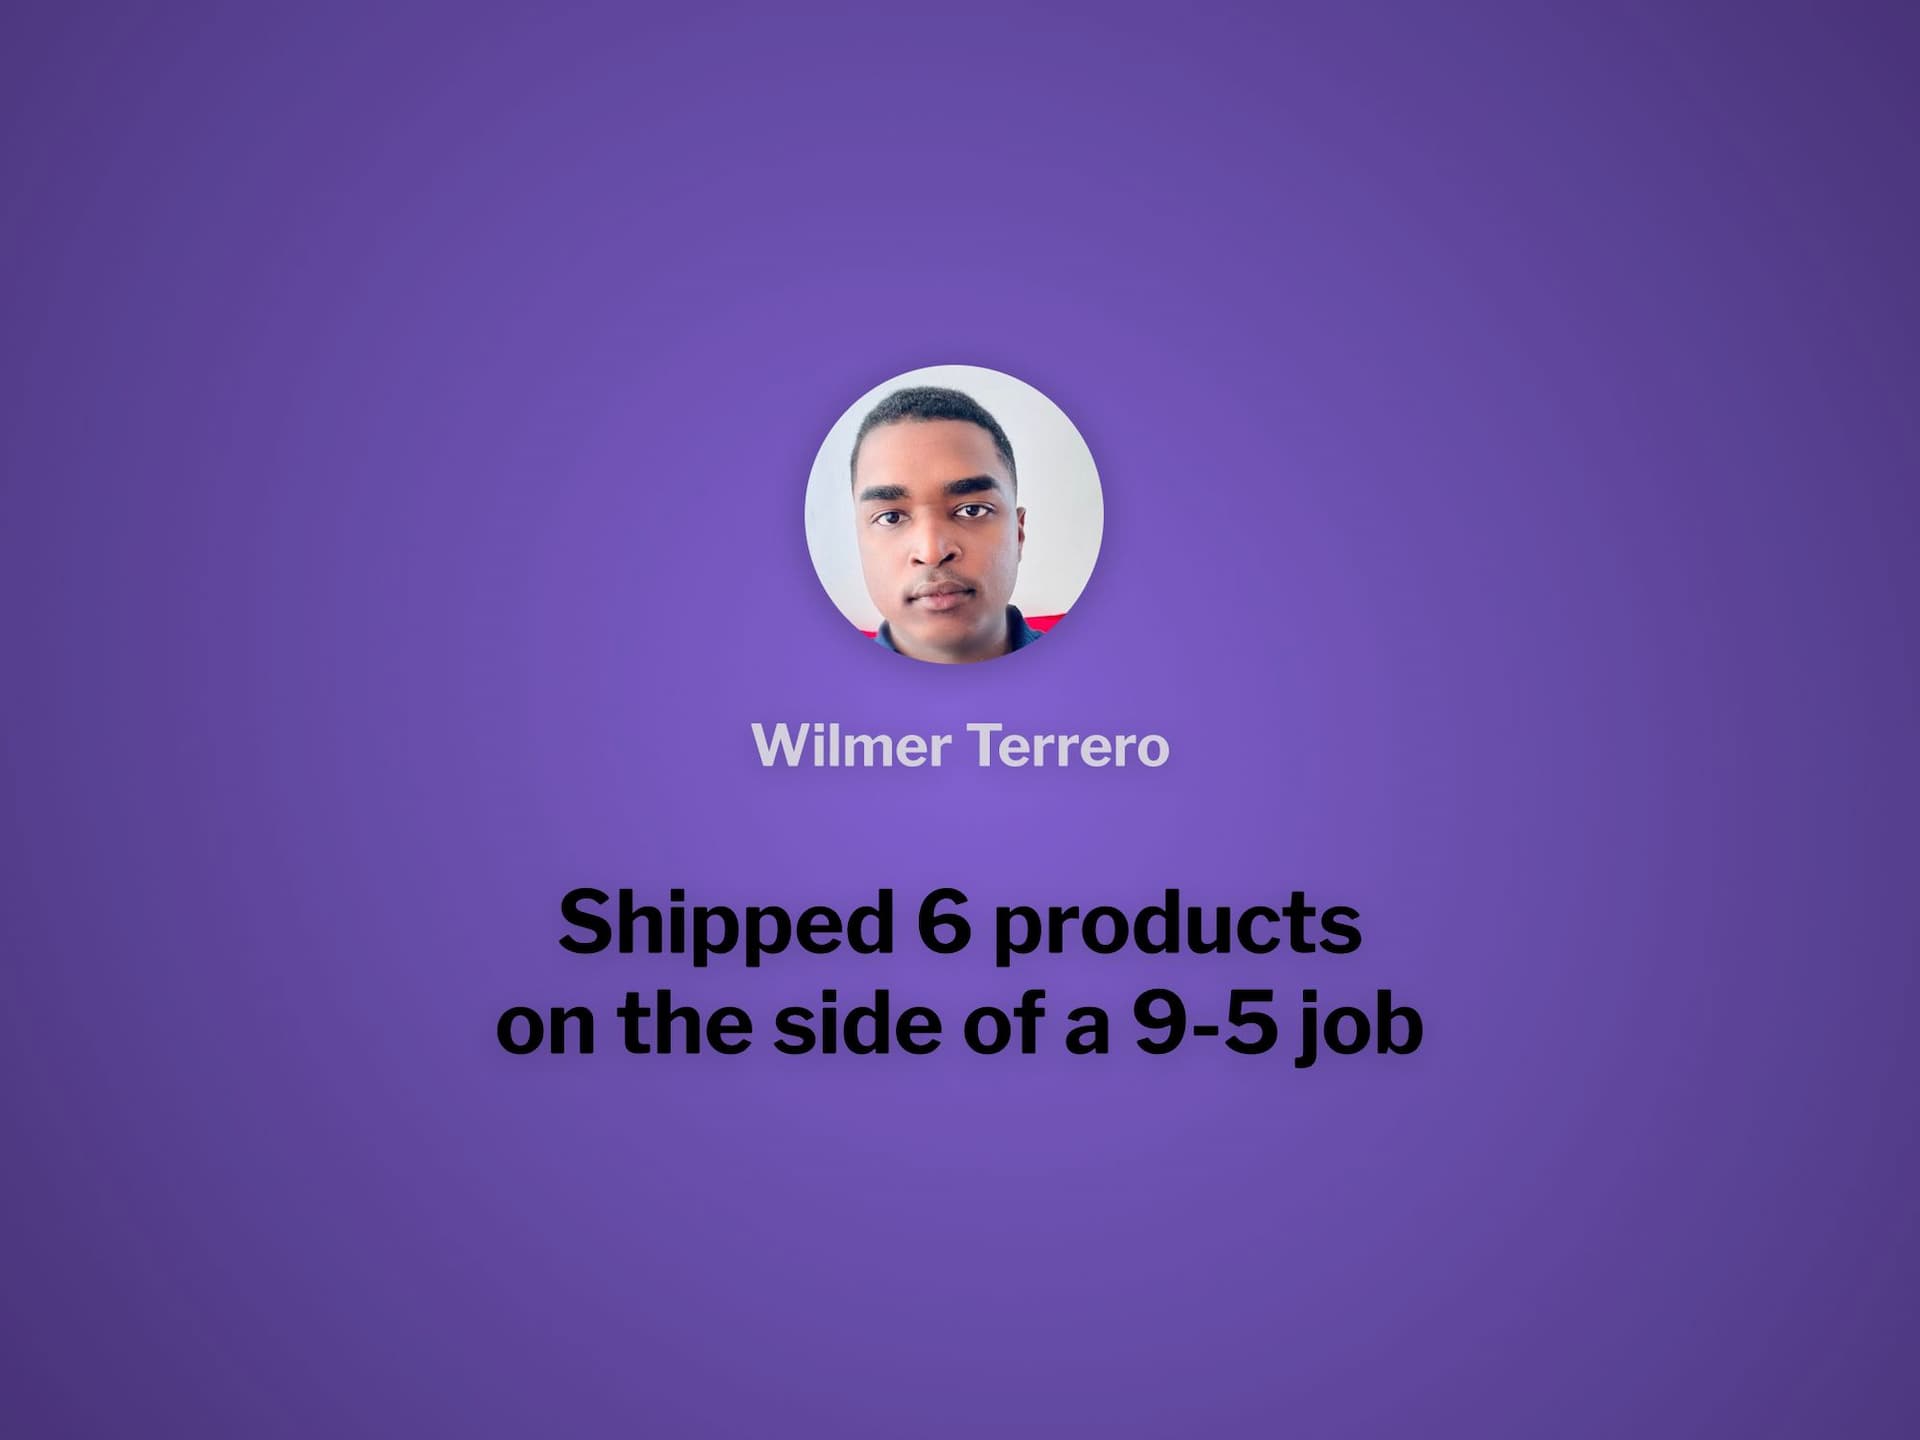 Cover image for Next.js Dev Wilmer Terrero shipped 6 side projects